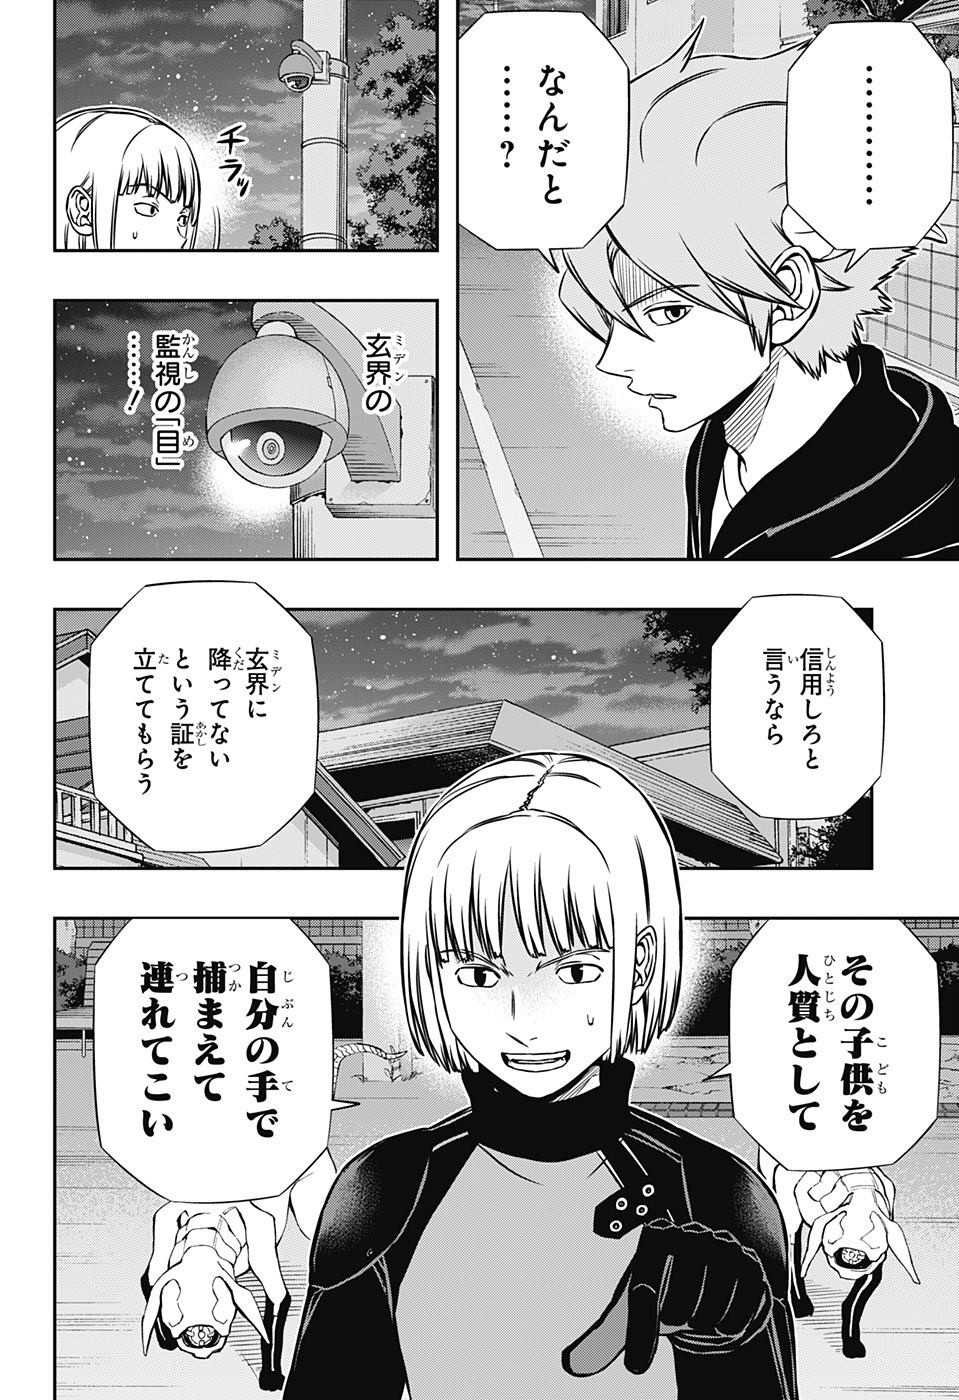 World Trigger - Chapter 134 - Page 18